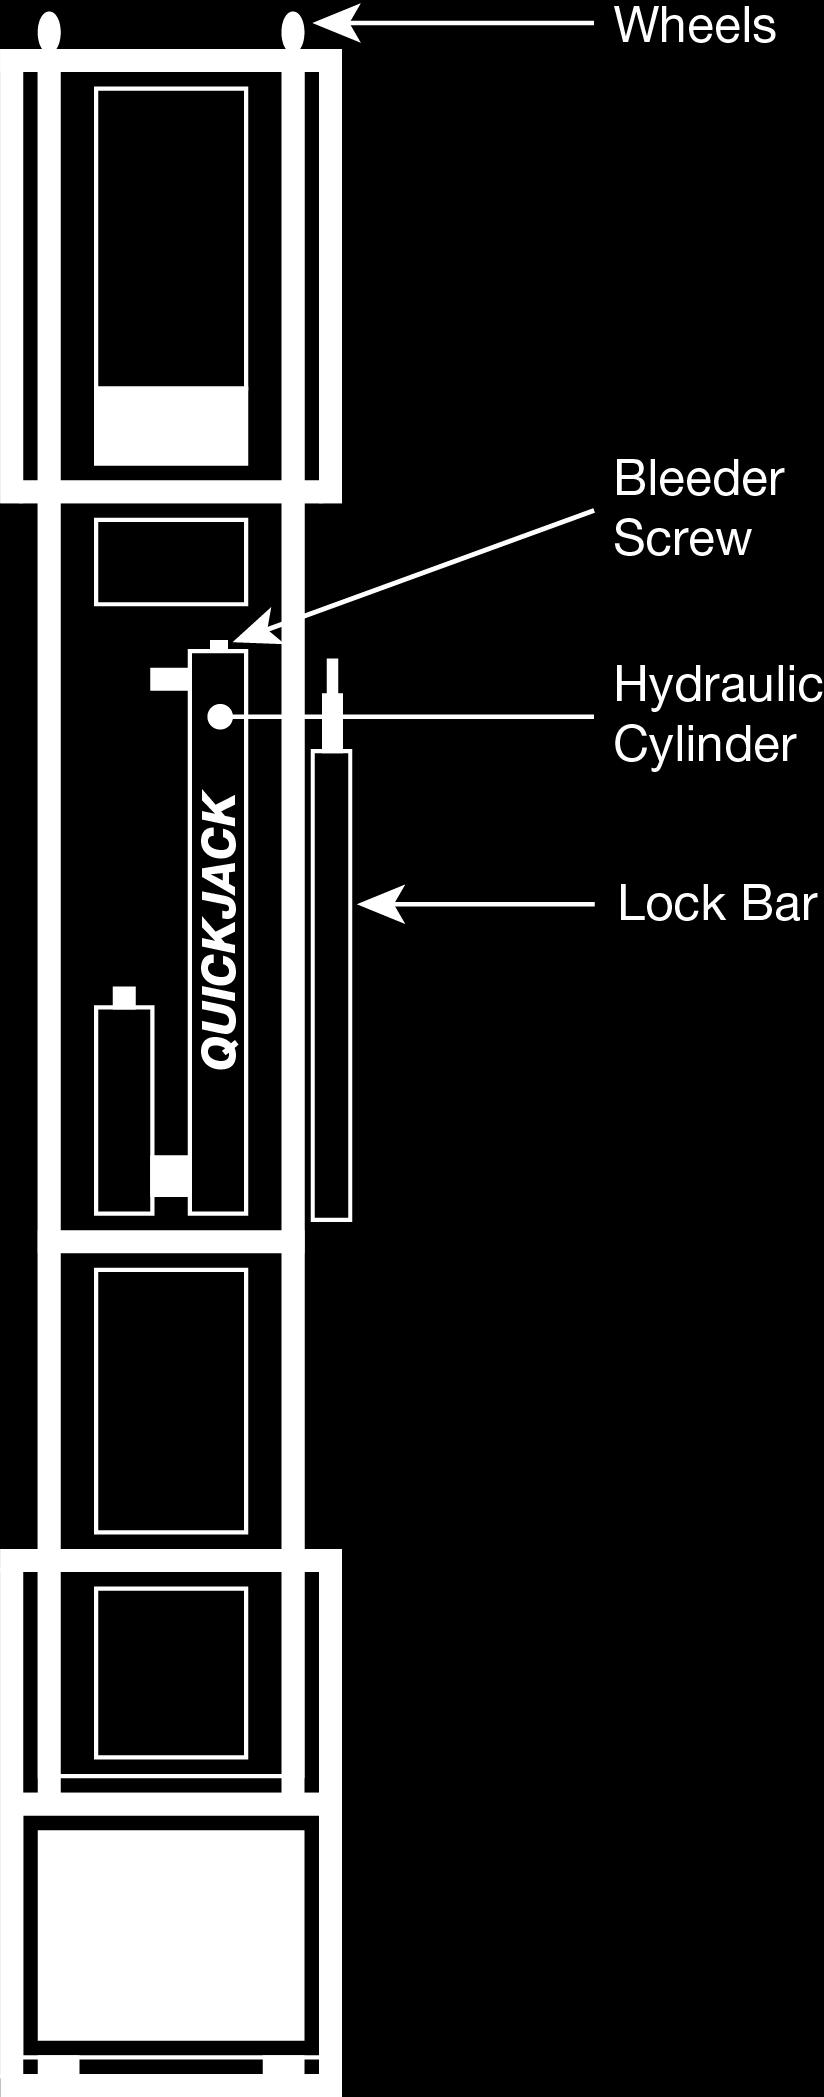 To bleed a Hydraulic Cylinder: 1. Make sure the QuickJack Frame is flat on the ground, then raise the rear end (the end with the wheels on it) straight up.